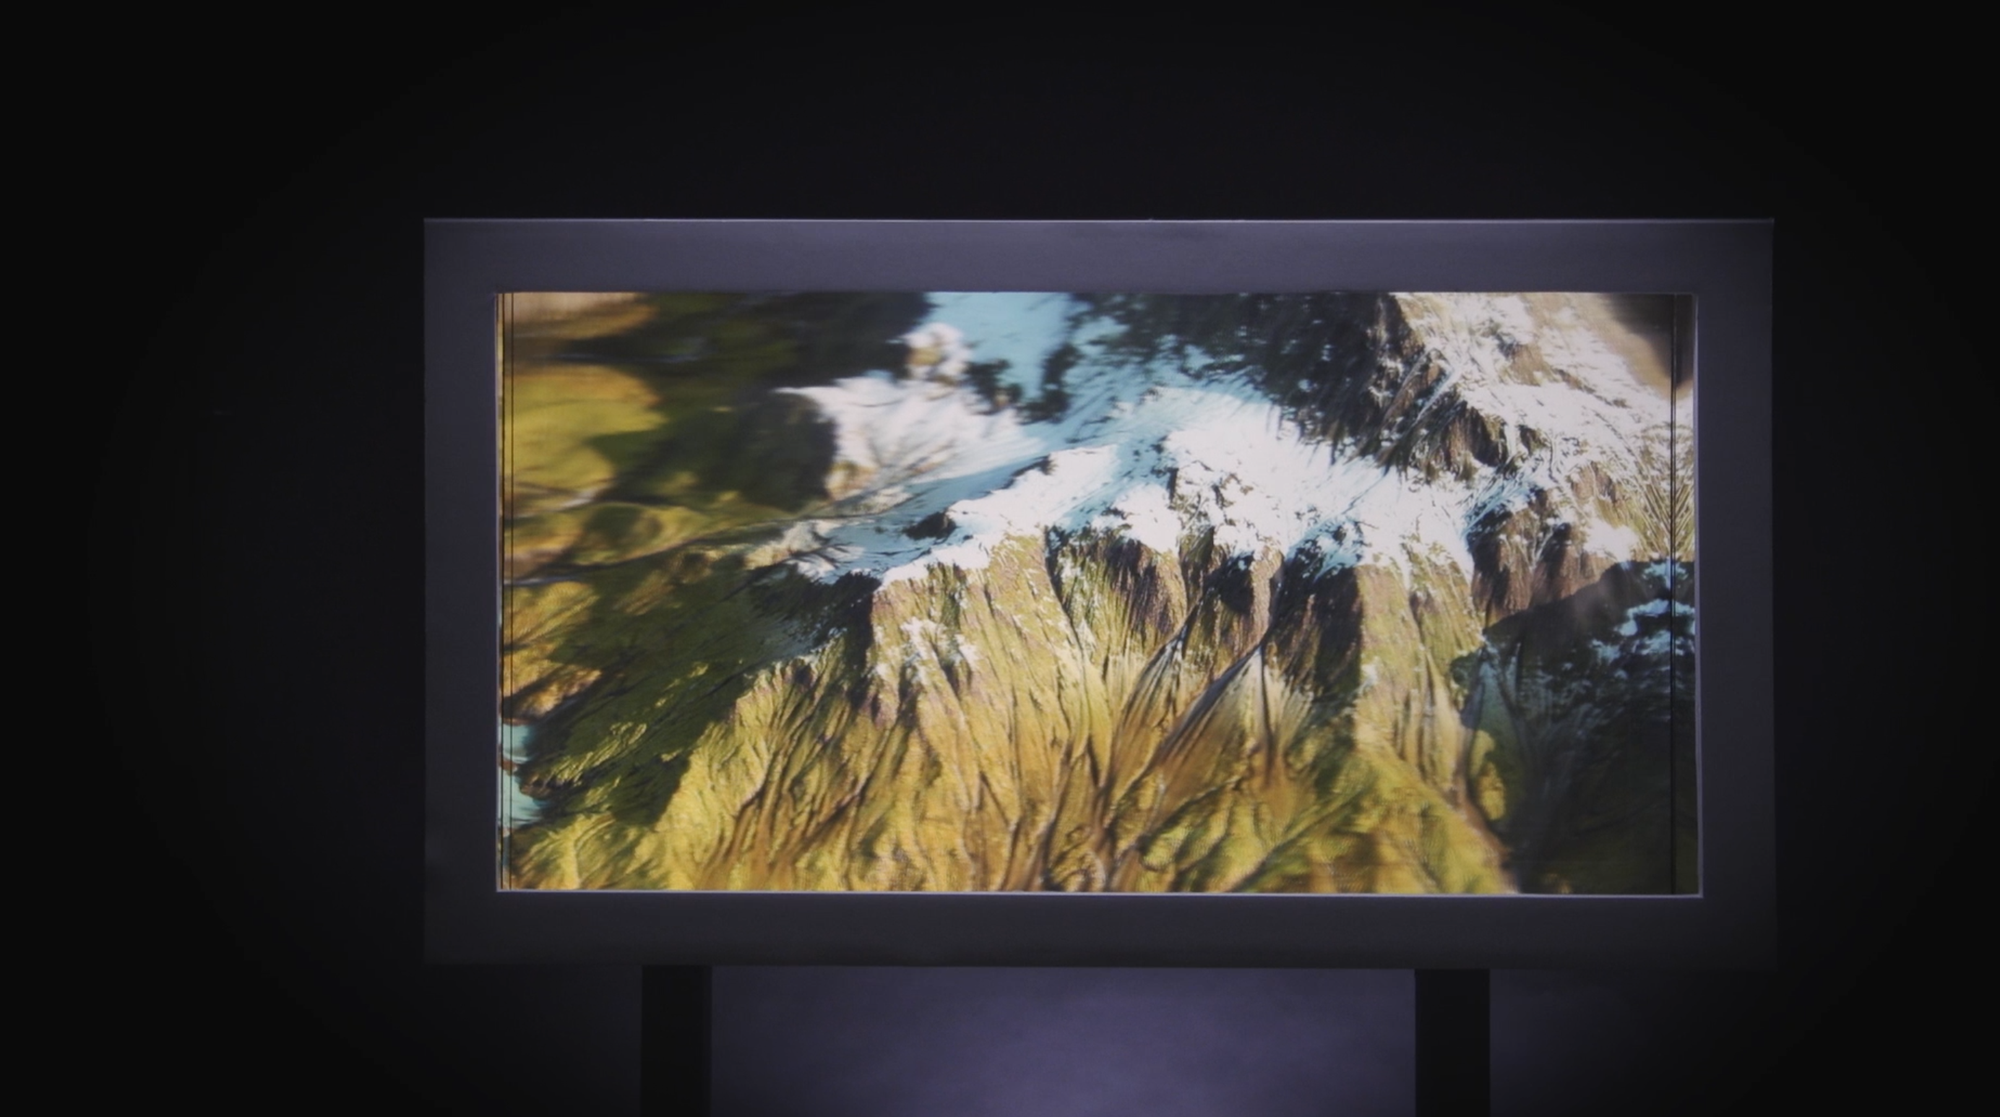 The Looking Glass 8K Immersive Display